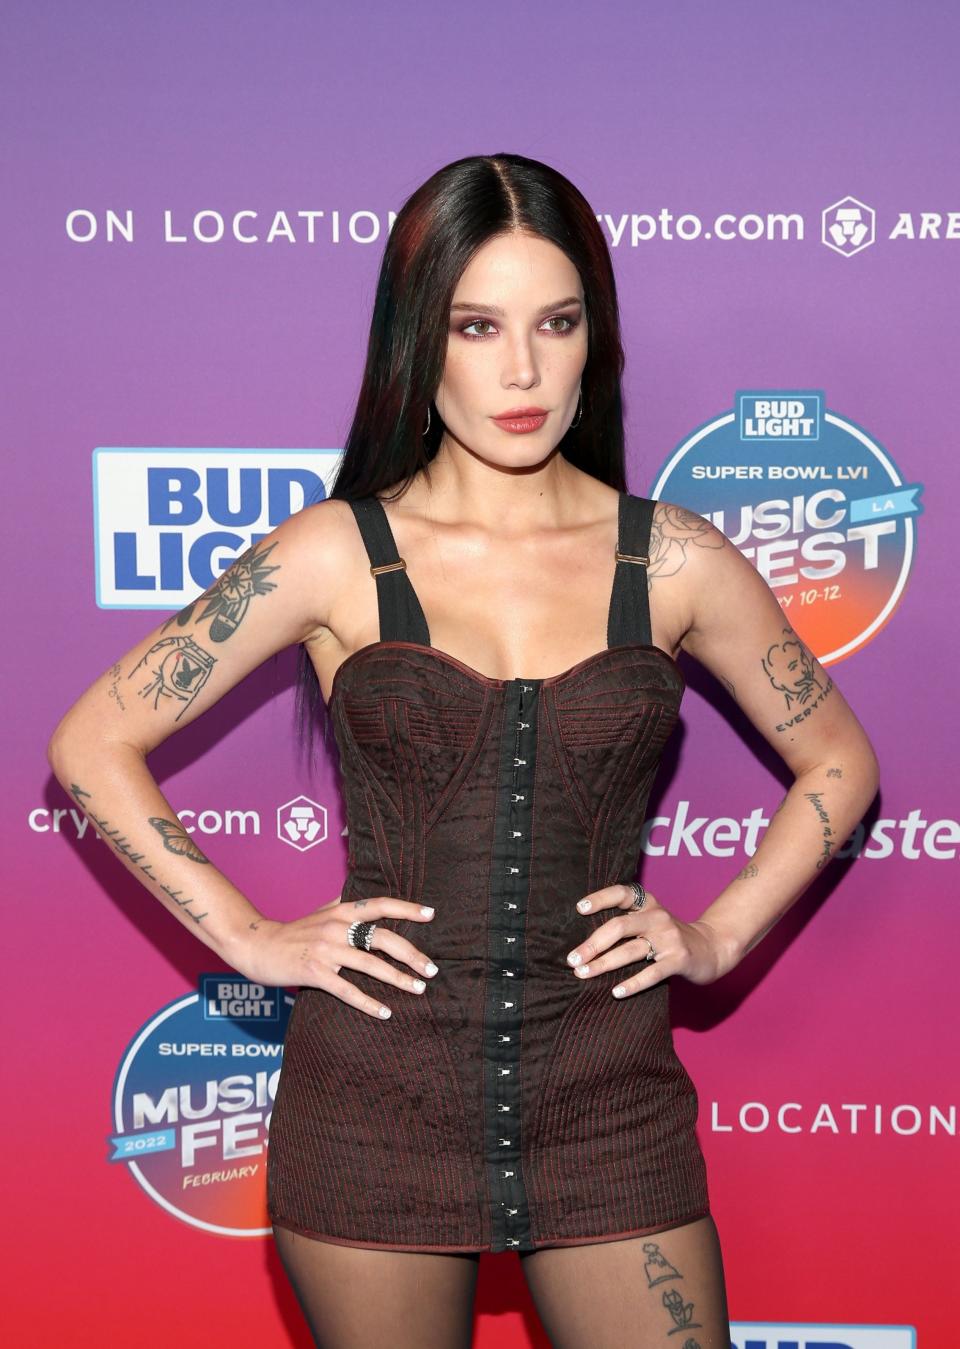 Halsey poses with her hands on her hips at a Super Bowl event red carpet